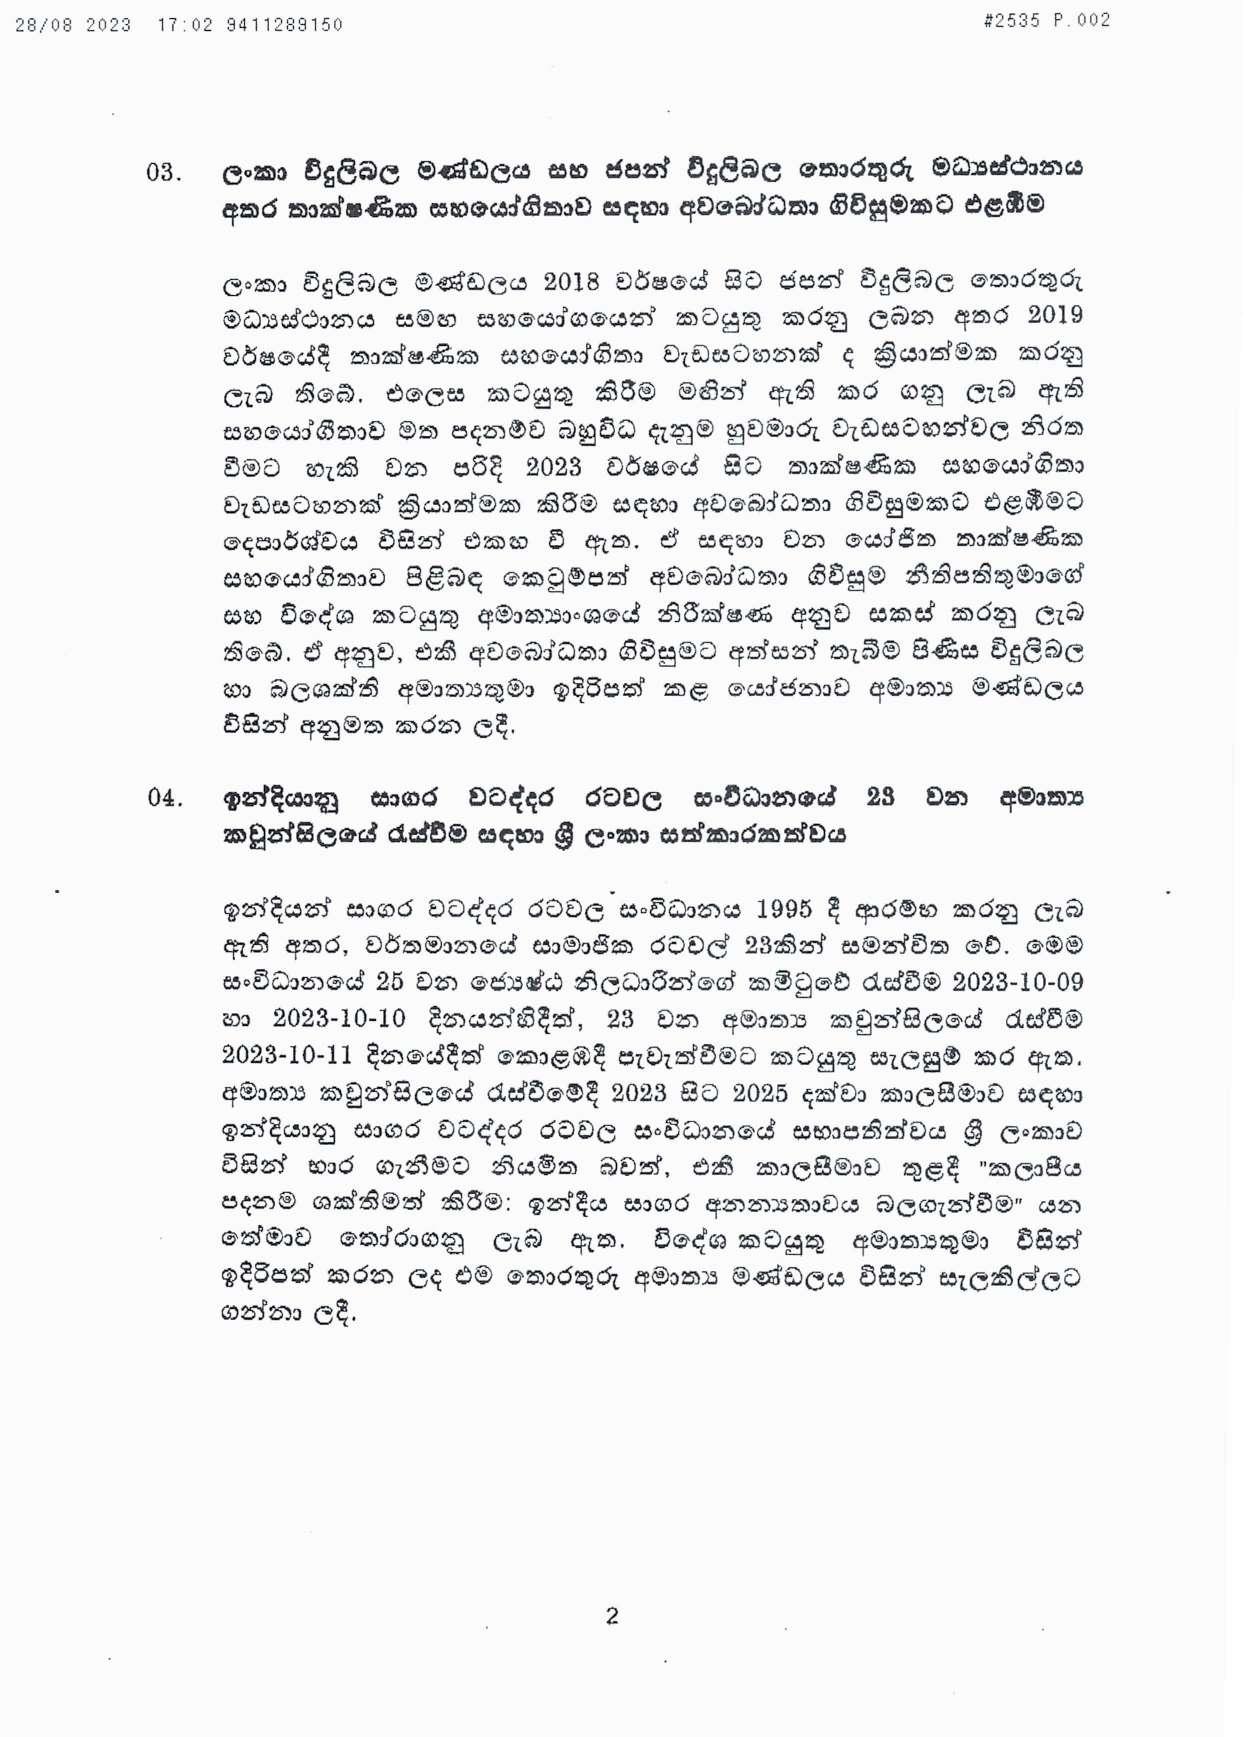 Cabinet Decision on 28.08.2023 1 page 002